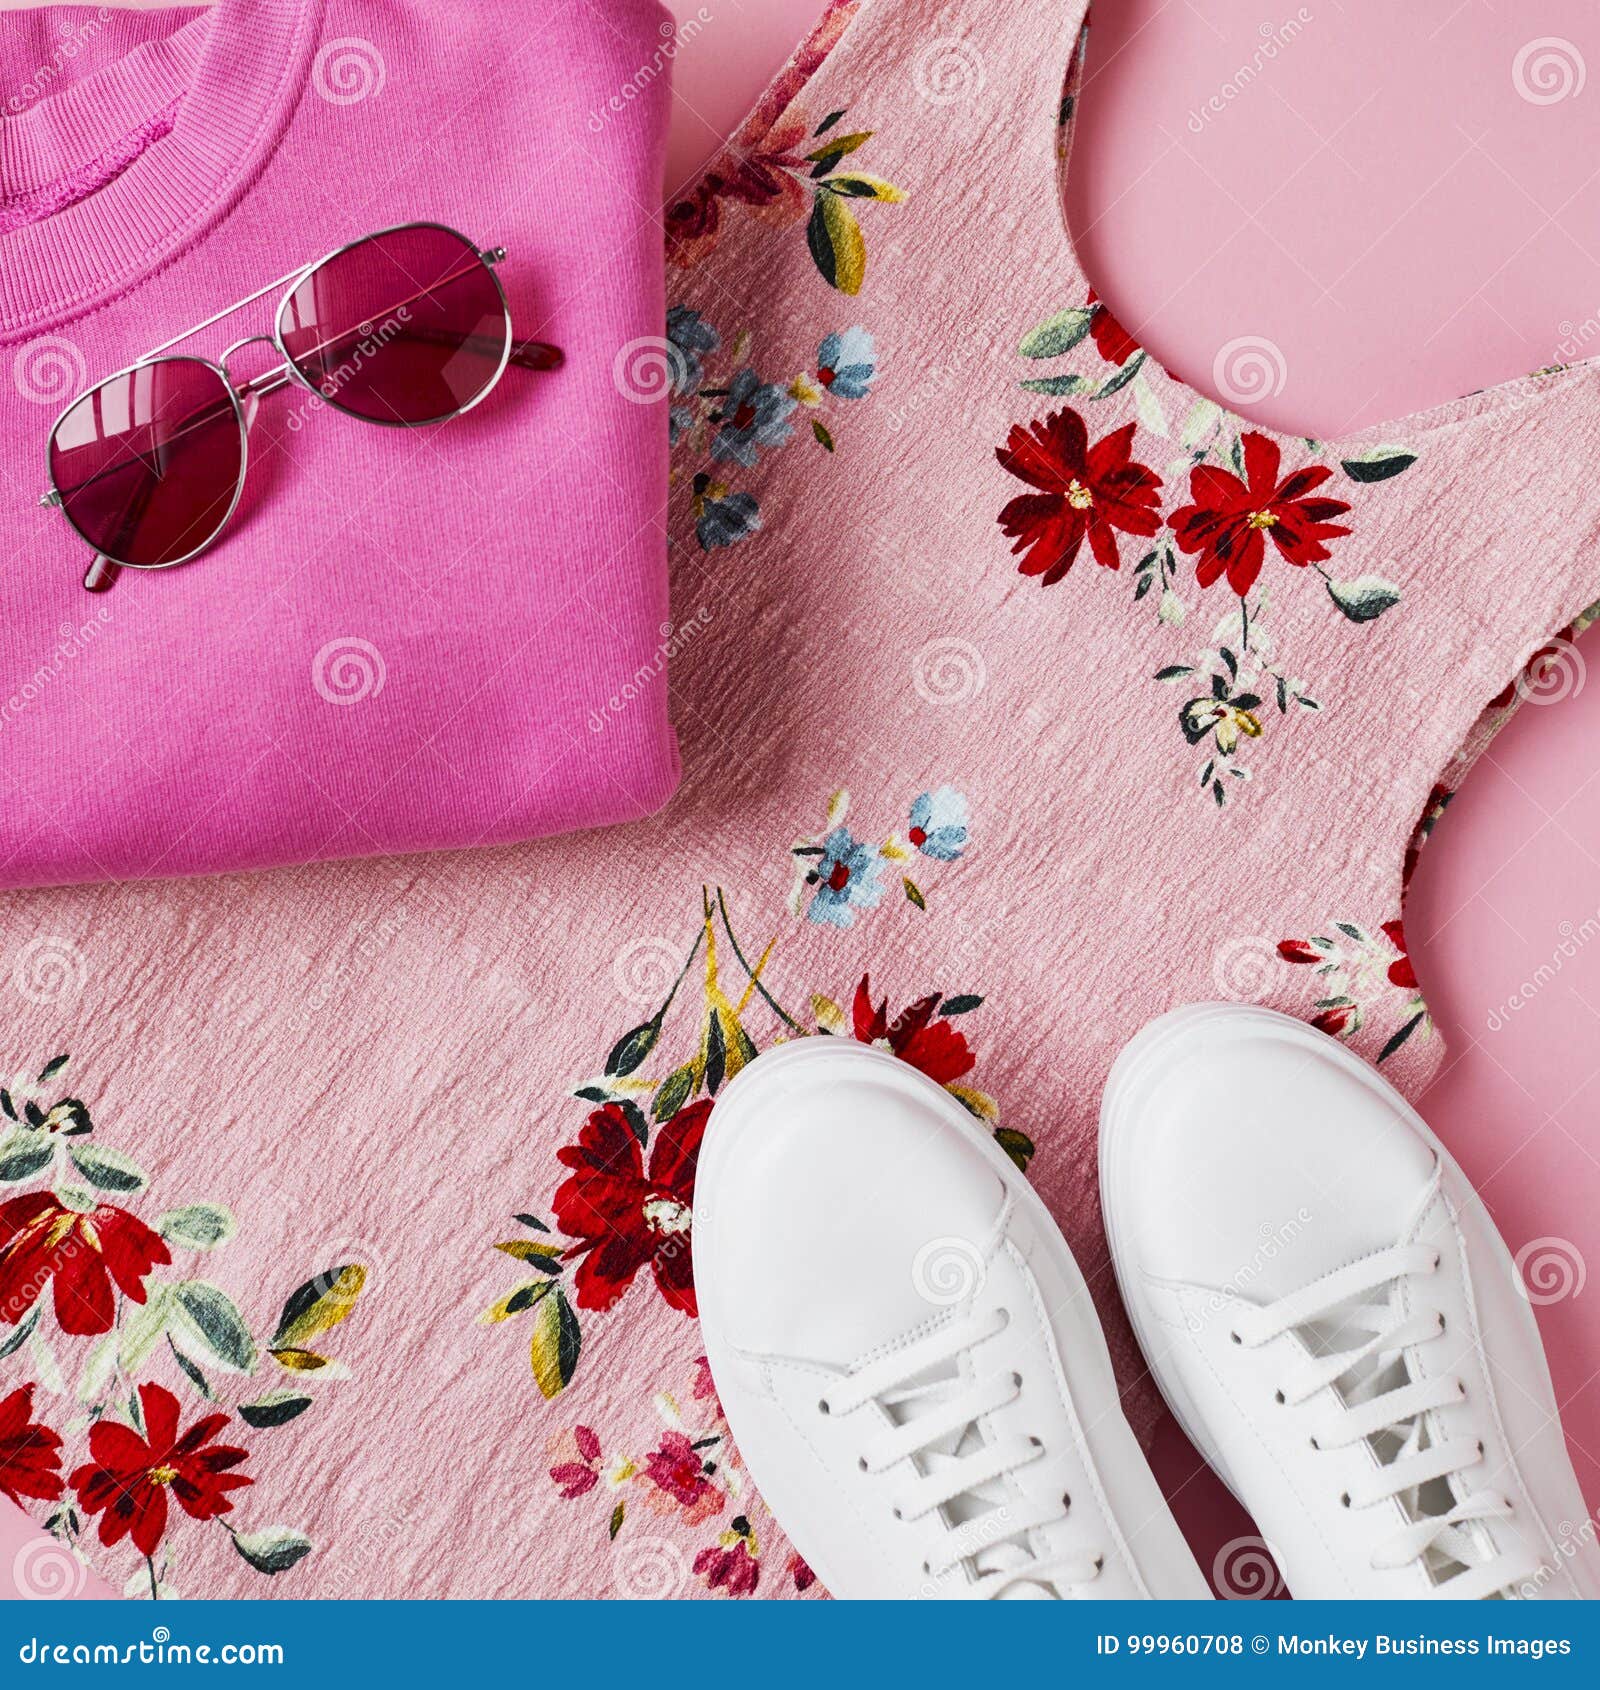 Flat Lay Shot of Female Holiday Clothing and Accessories Stock Photo ...